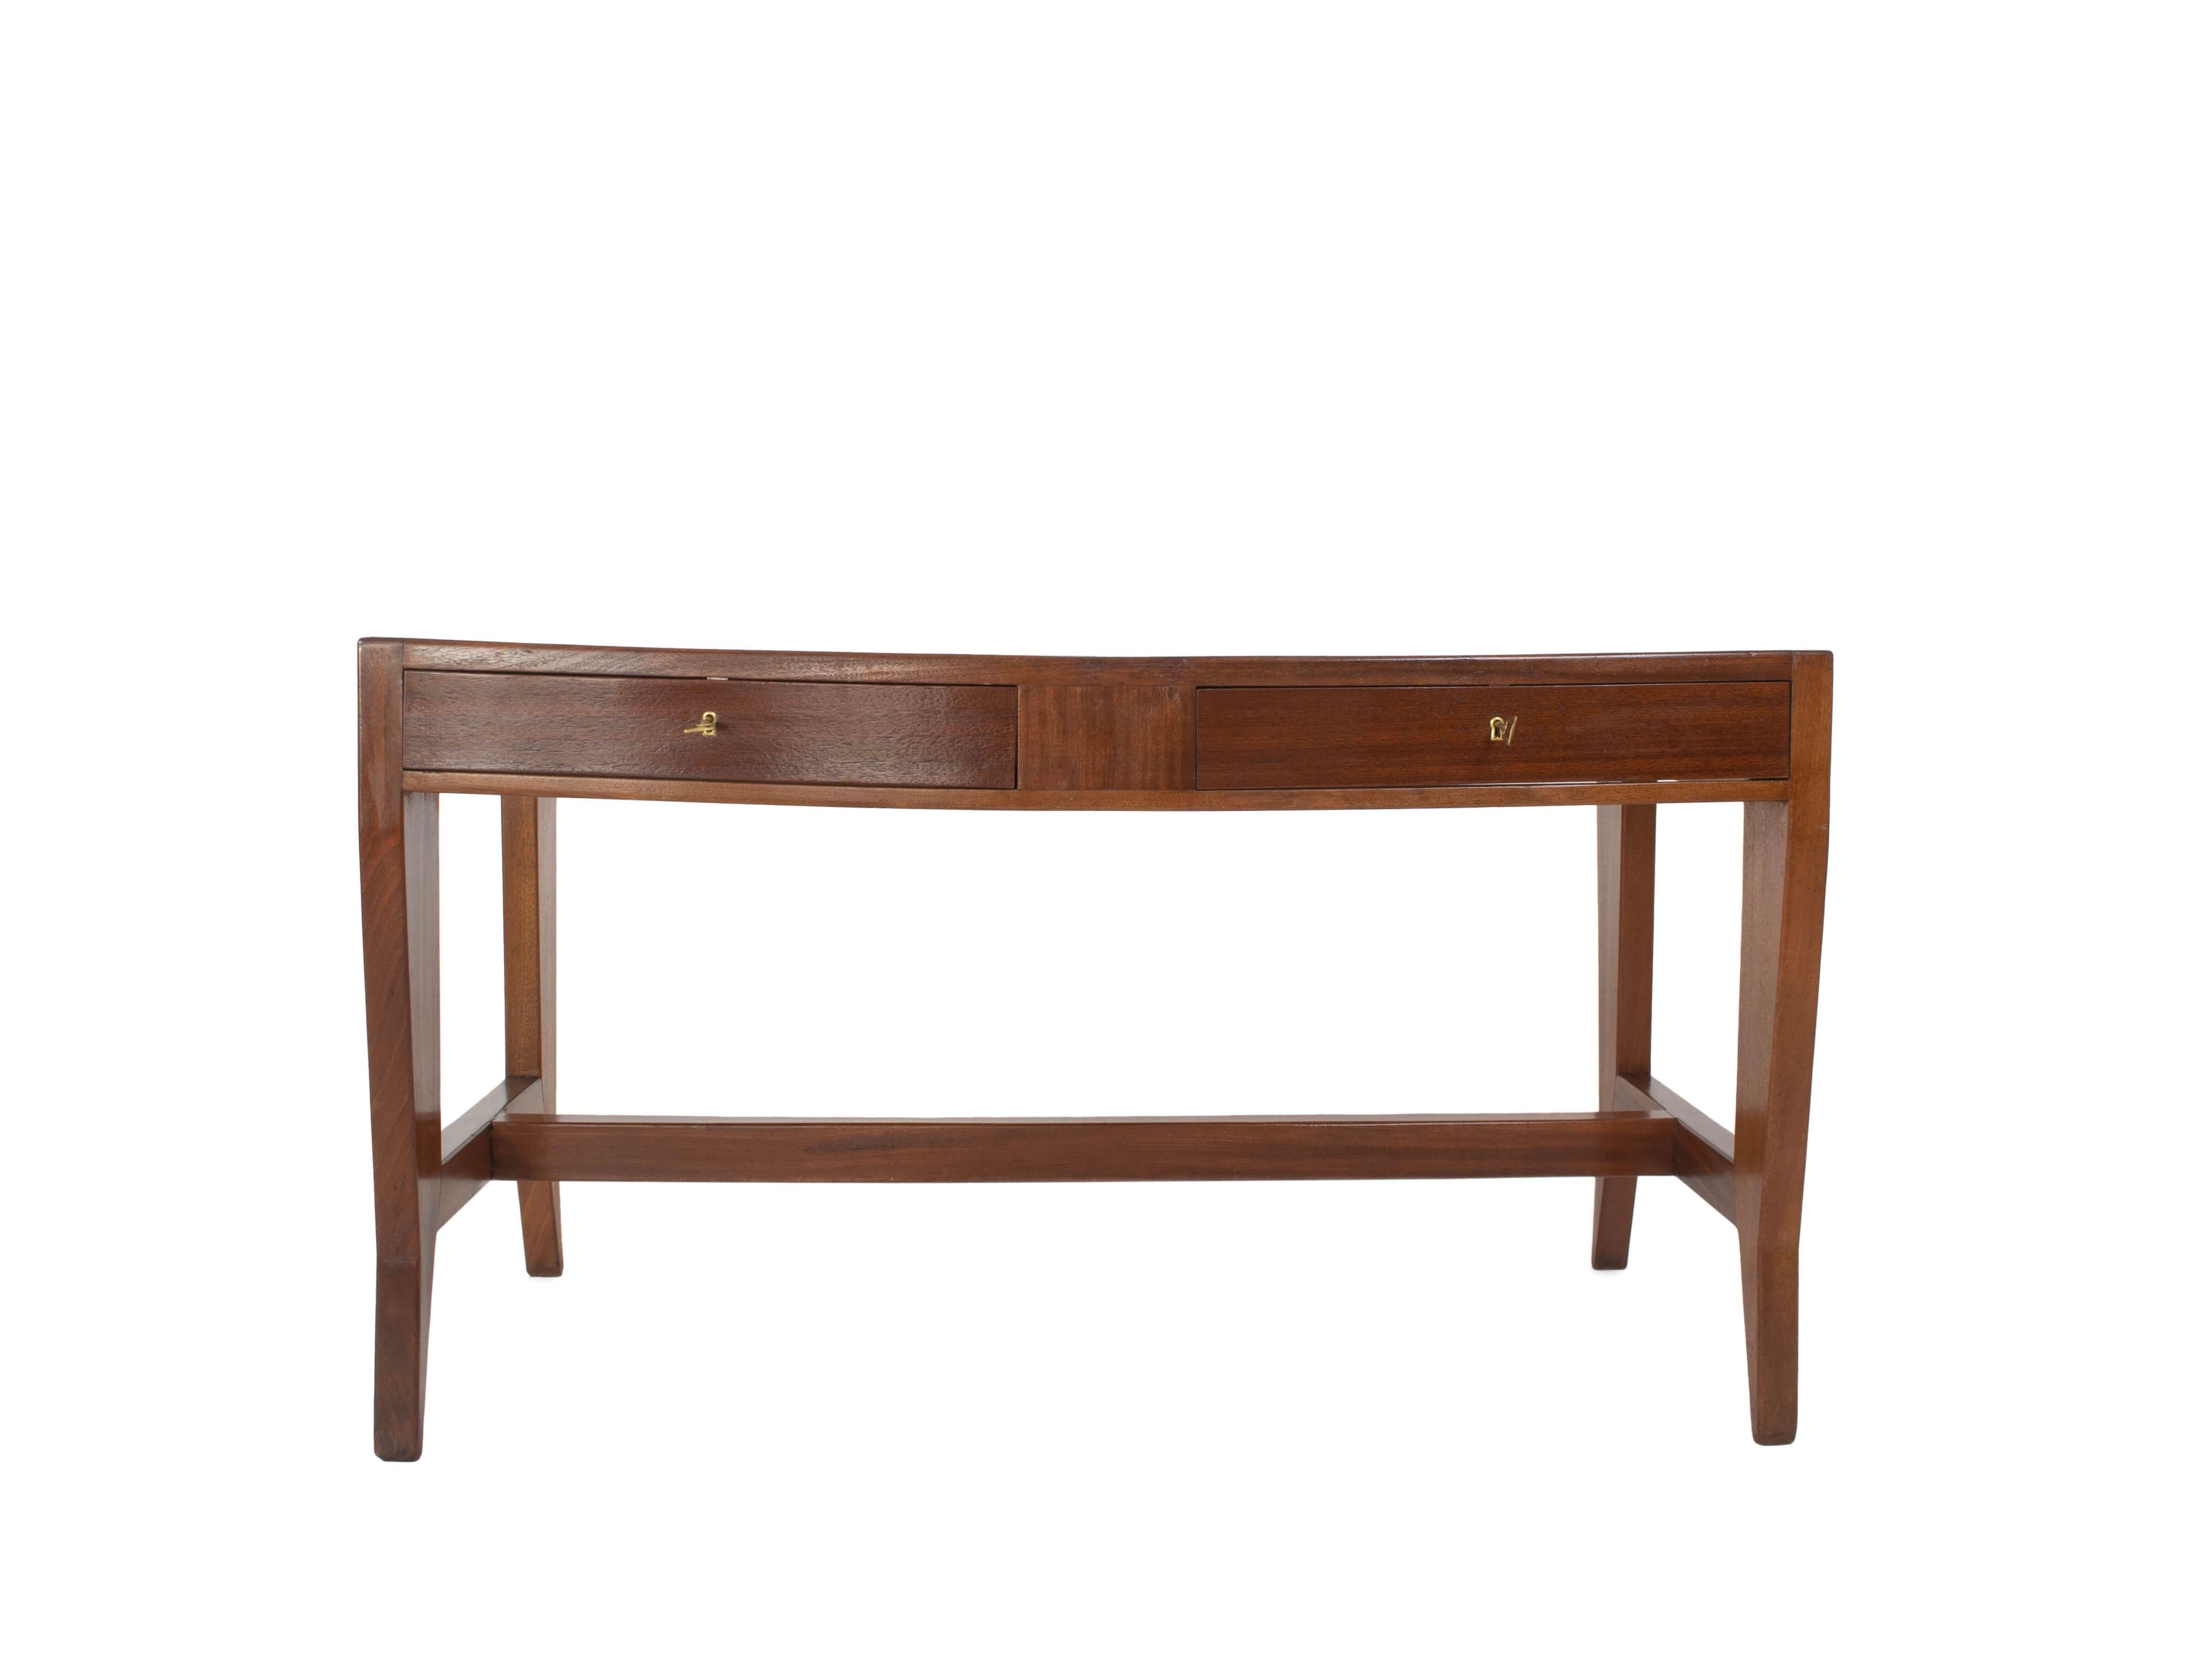 Gio Ponti Desk in Mahogany Veneer and Beech Wood produced by Schirolli for the 'Banca Nazionale del Lavoro', Italy 1950s. This desk has two drawers with beautiful brass keyholes and keys. It has distinctive features from Gio Ponti with the cut